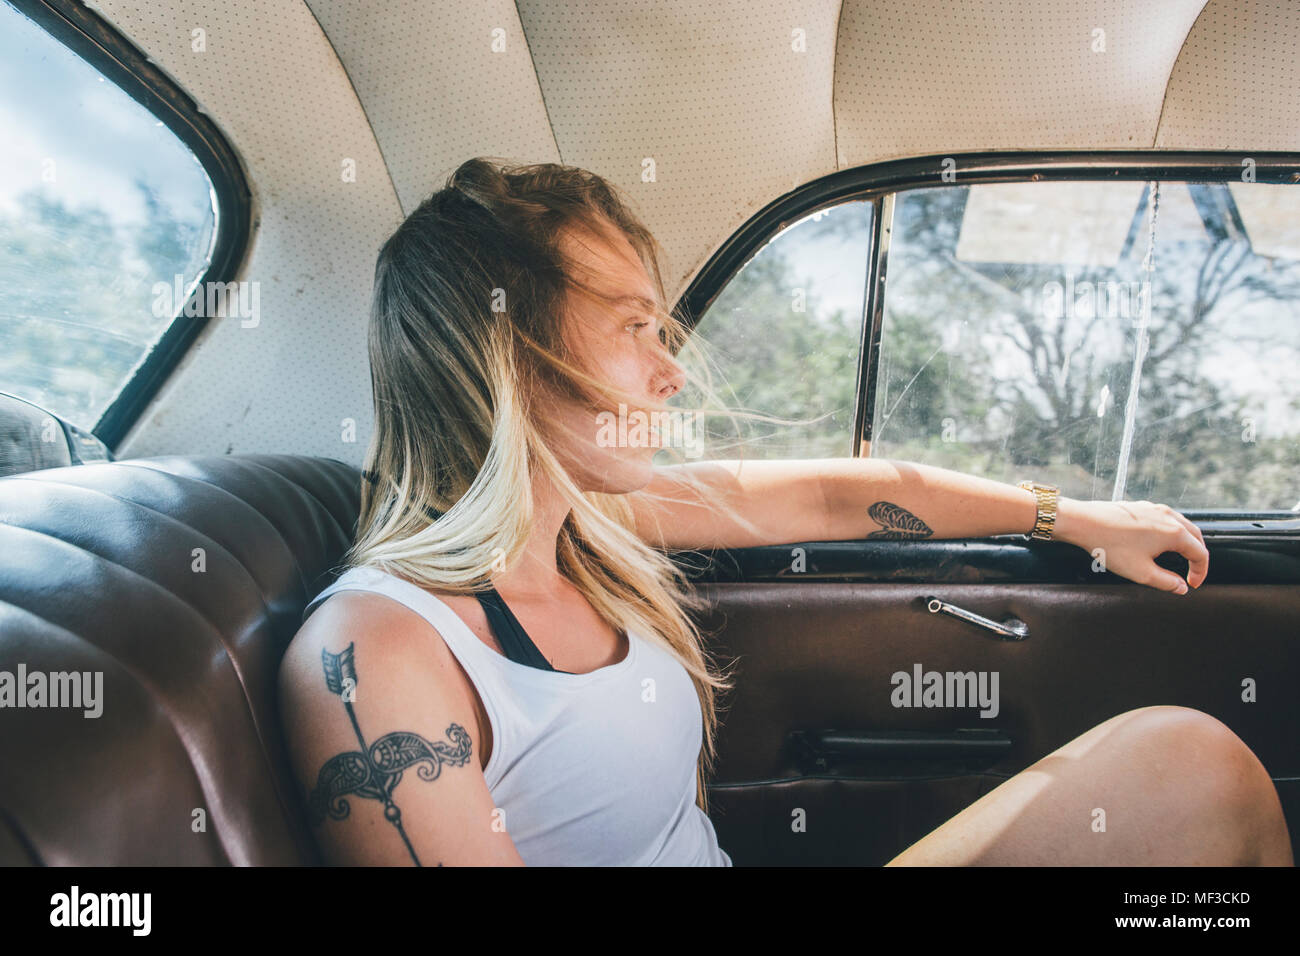 Cuba, Young woman sitting in a vintage car Stock Photo